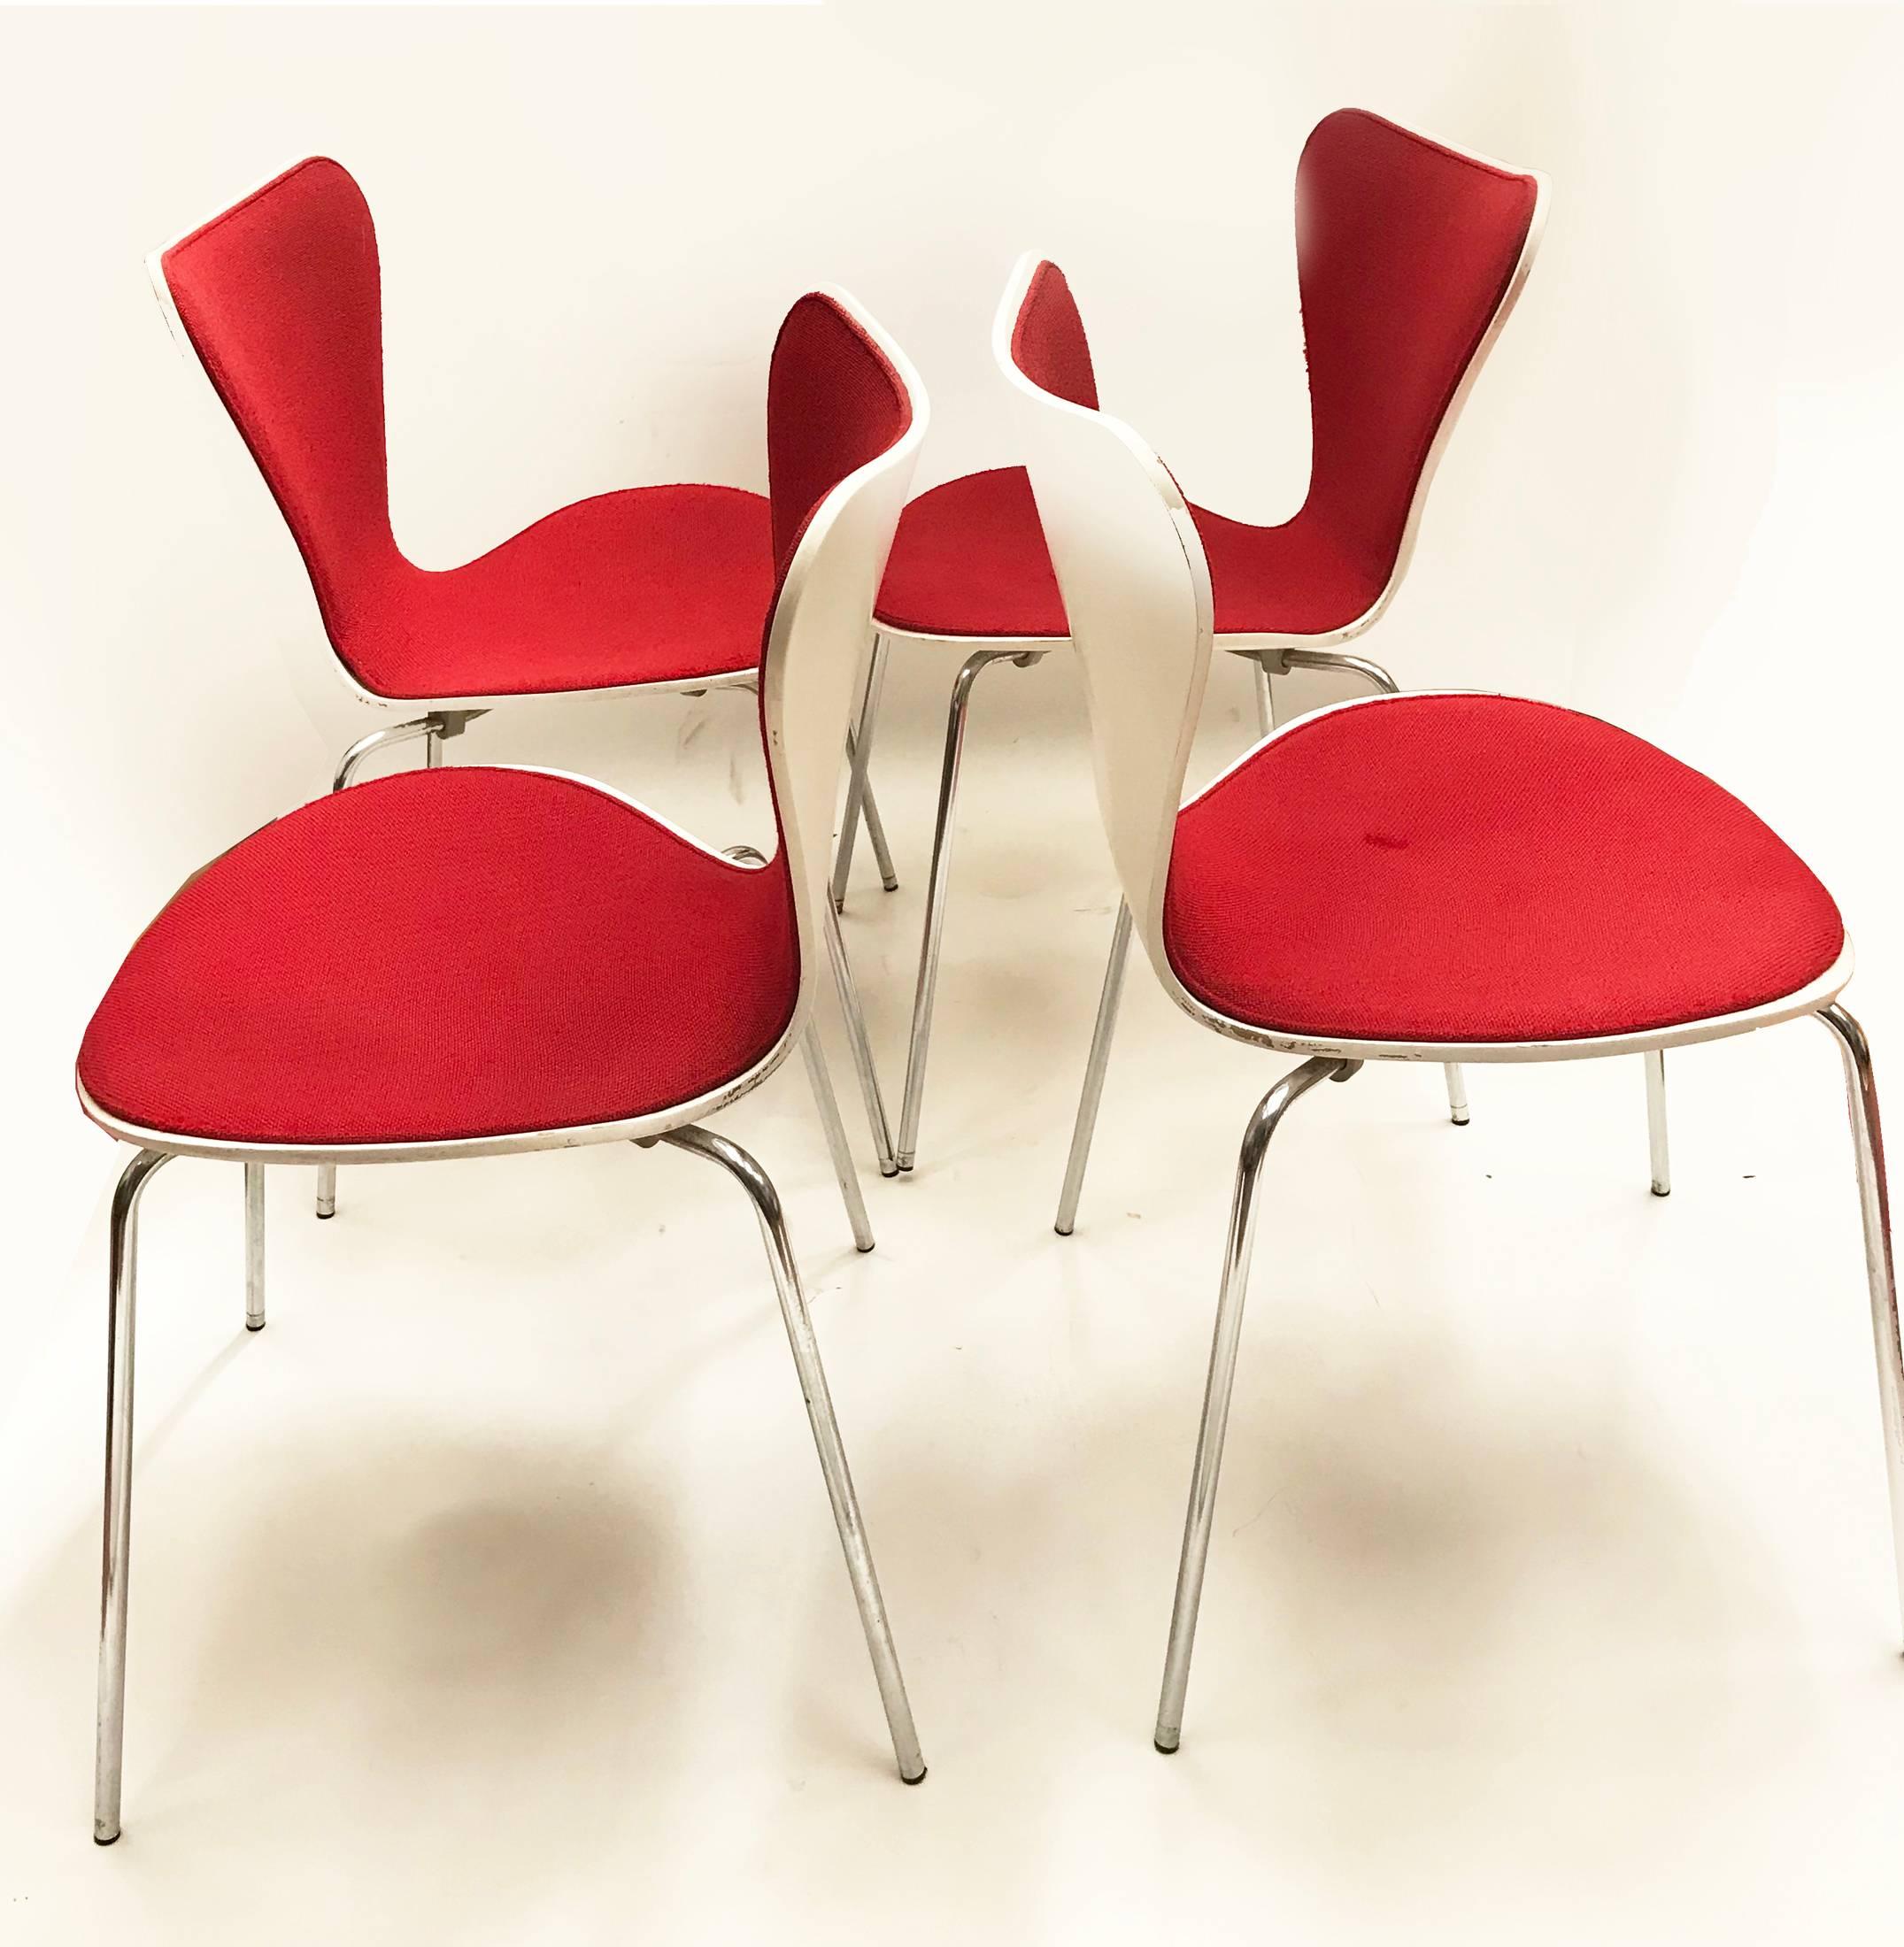 Set of four series 7 chairs that are front upholstered in red original fabric (hallindal by Kvadrat) and white lacquered rear side.
Bearing in mind these chairs are around 50 years old they are in pretty good conditions. The fabric has been